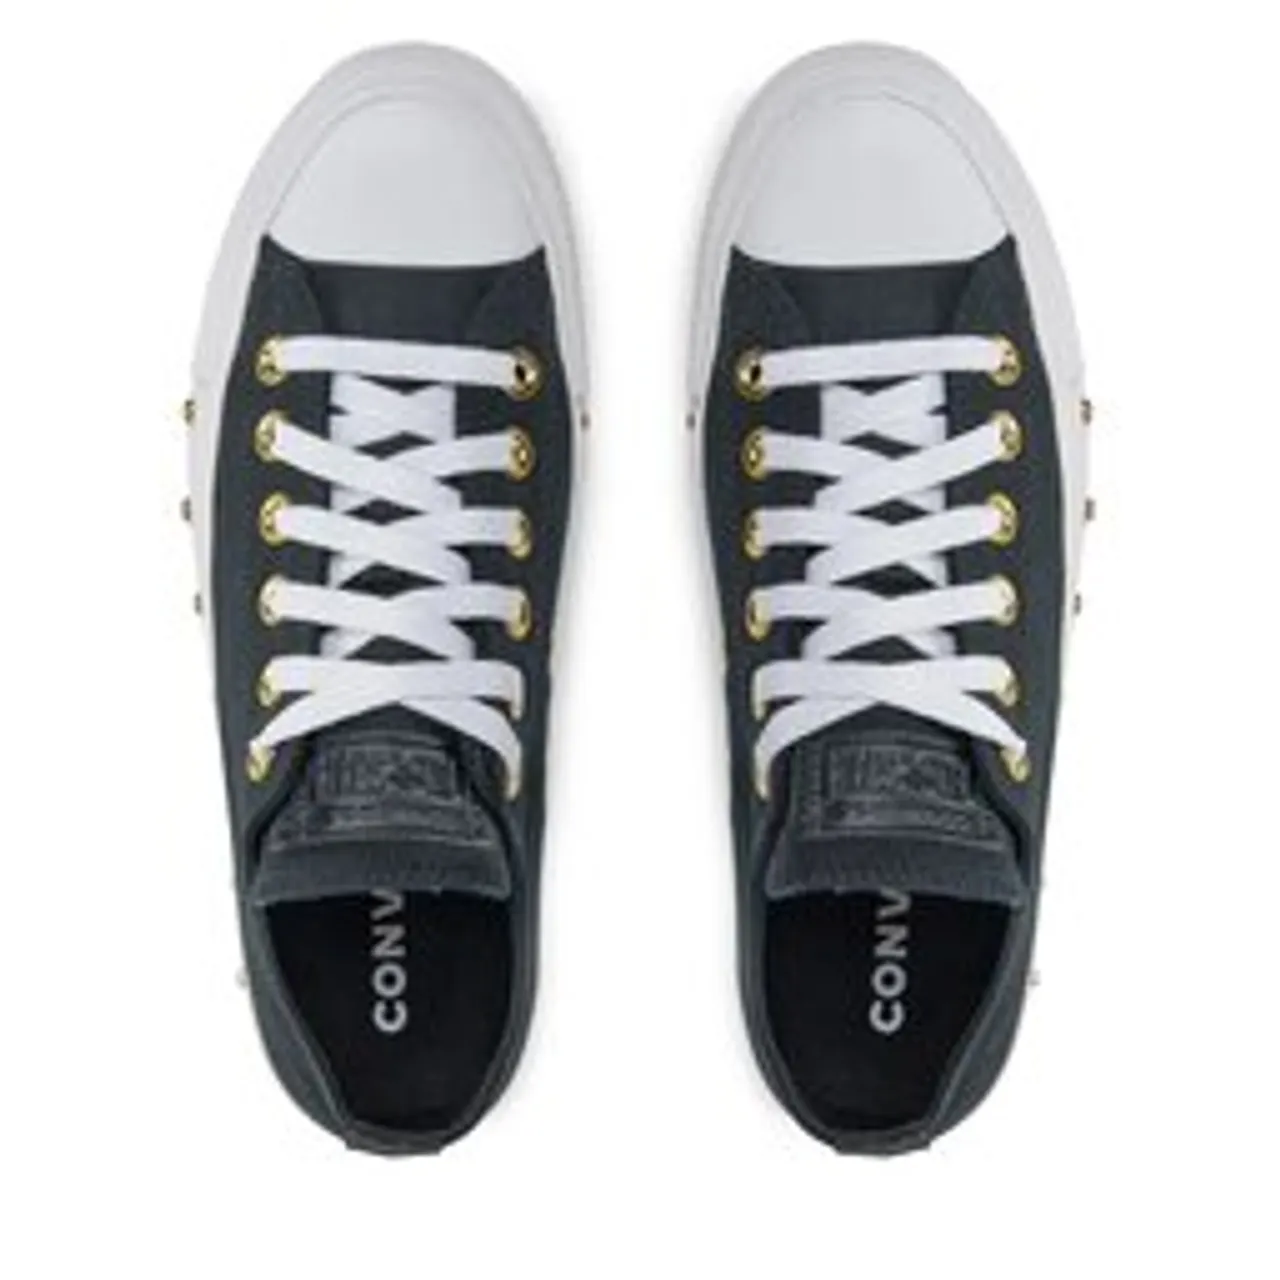 Sneakers aus Stoff Converse Chuck Taylor All Star A07907C Black